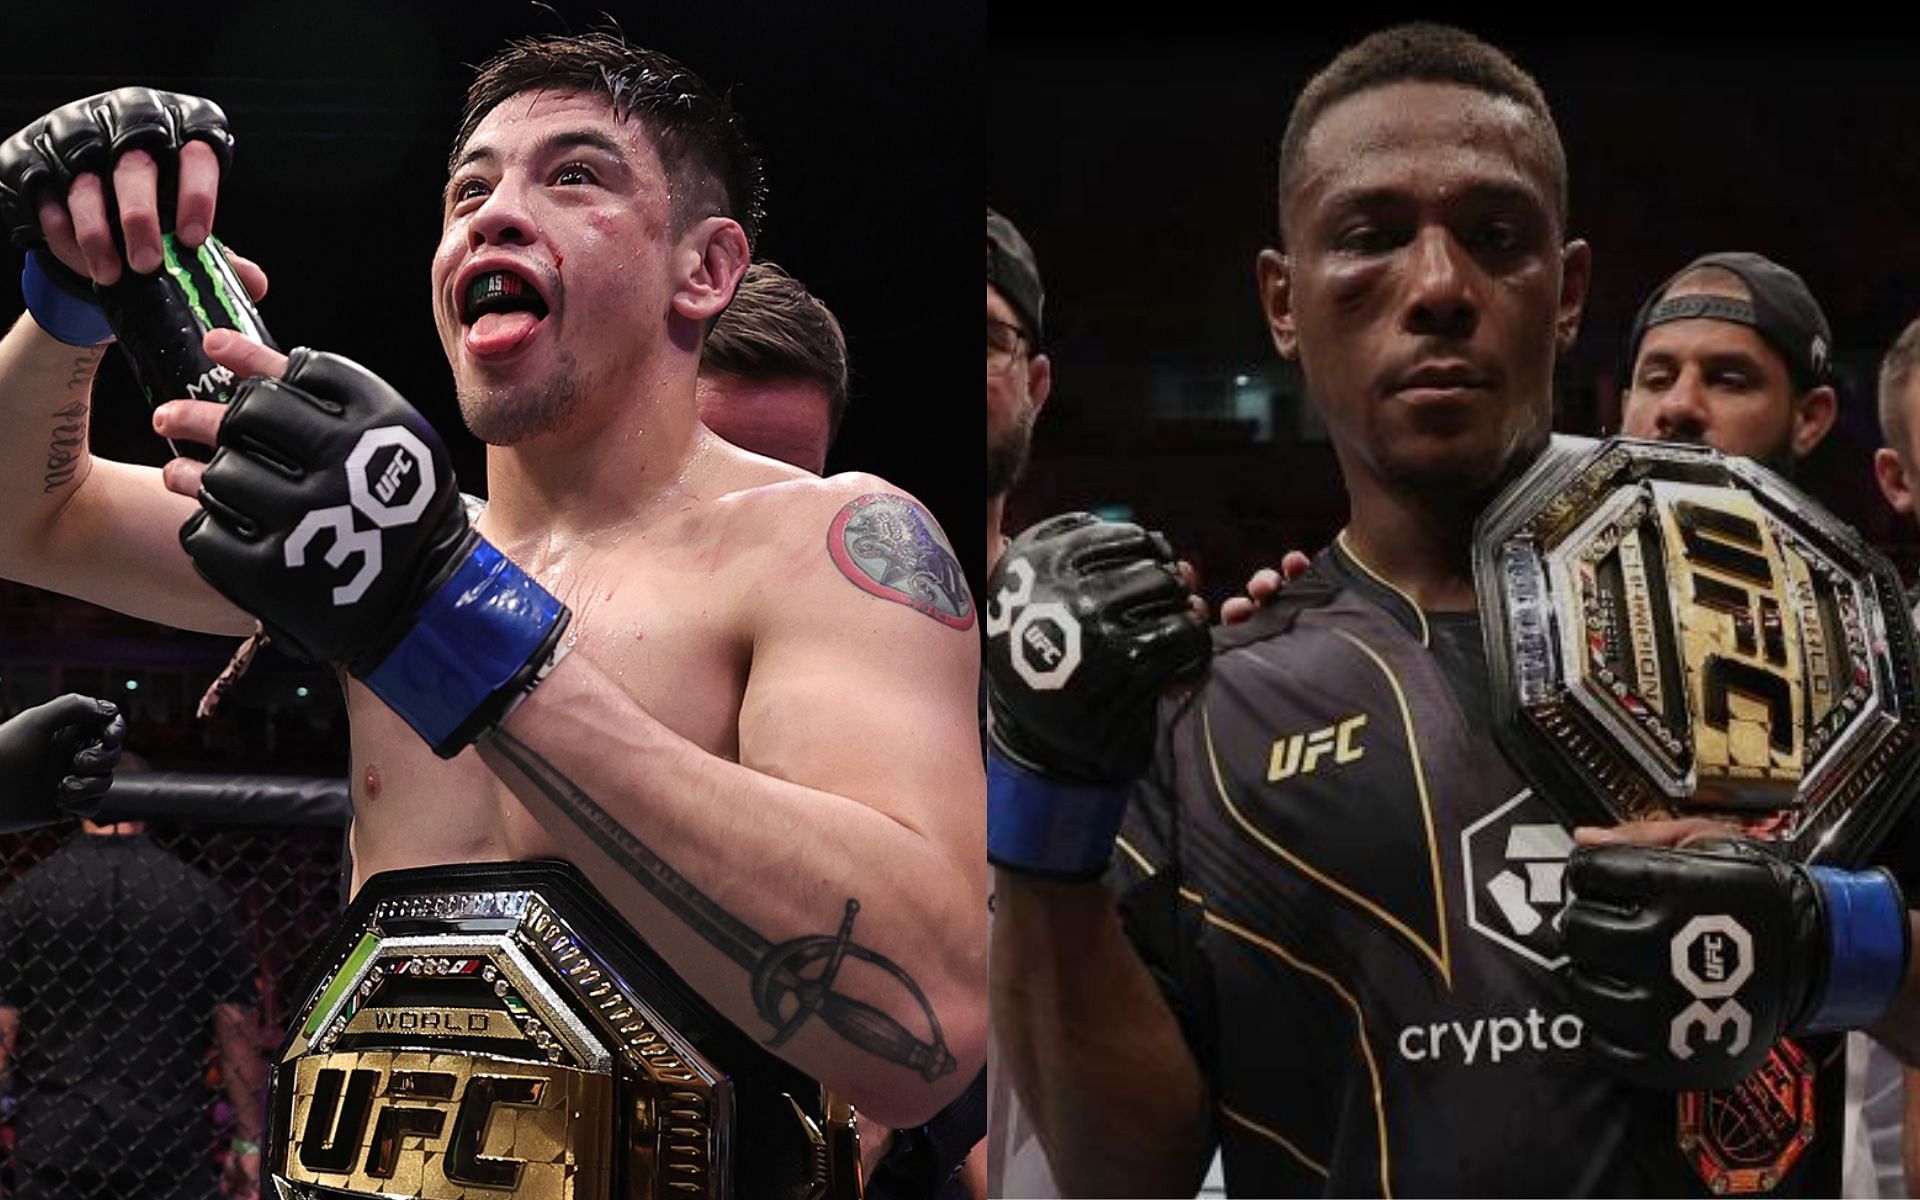 Brandon Moreno (left) and Jamahal Hill (right). [Images courtesy: left image from Twitter @btsportufc and right image from ufc.com]